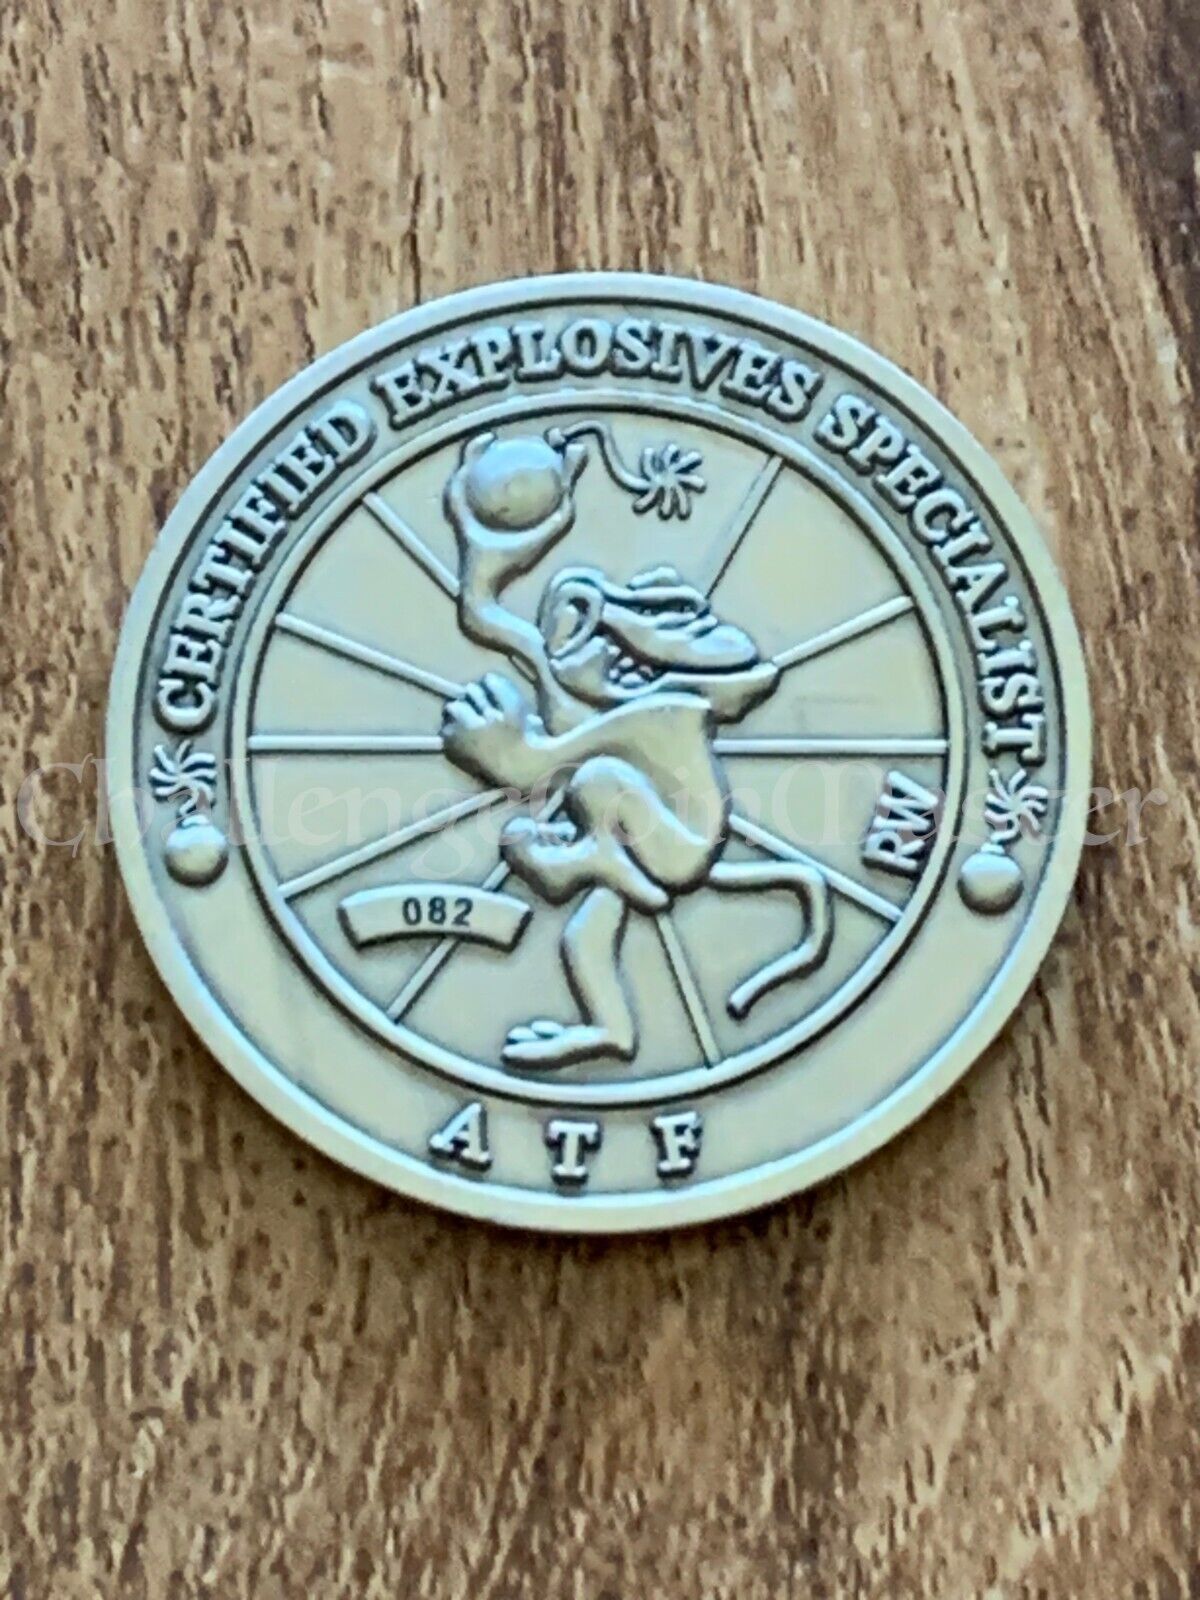 ATF Bureau of Alcohol Tobacco & Firearms Explosives Specialist Challenge Coin